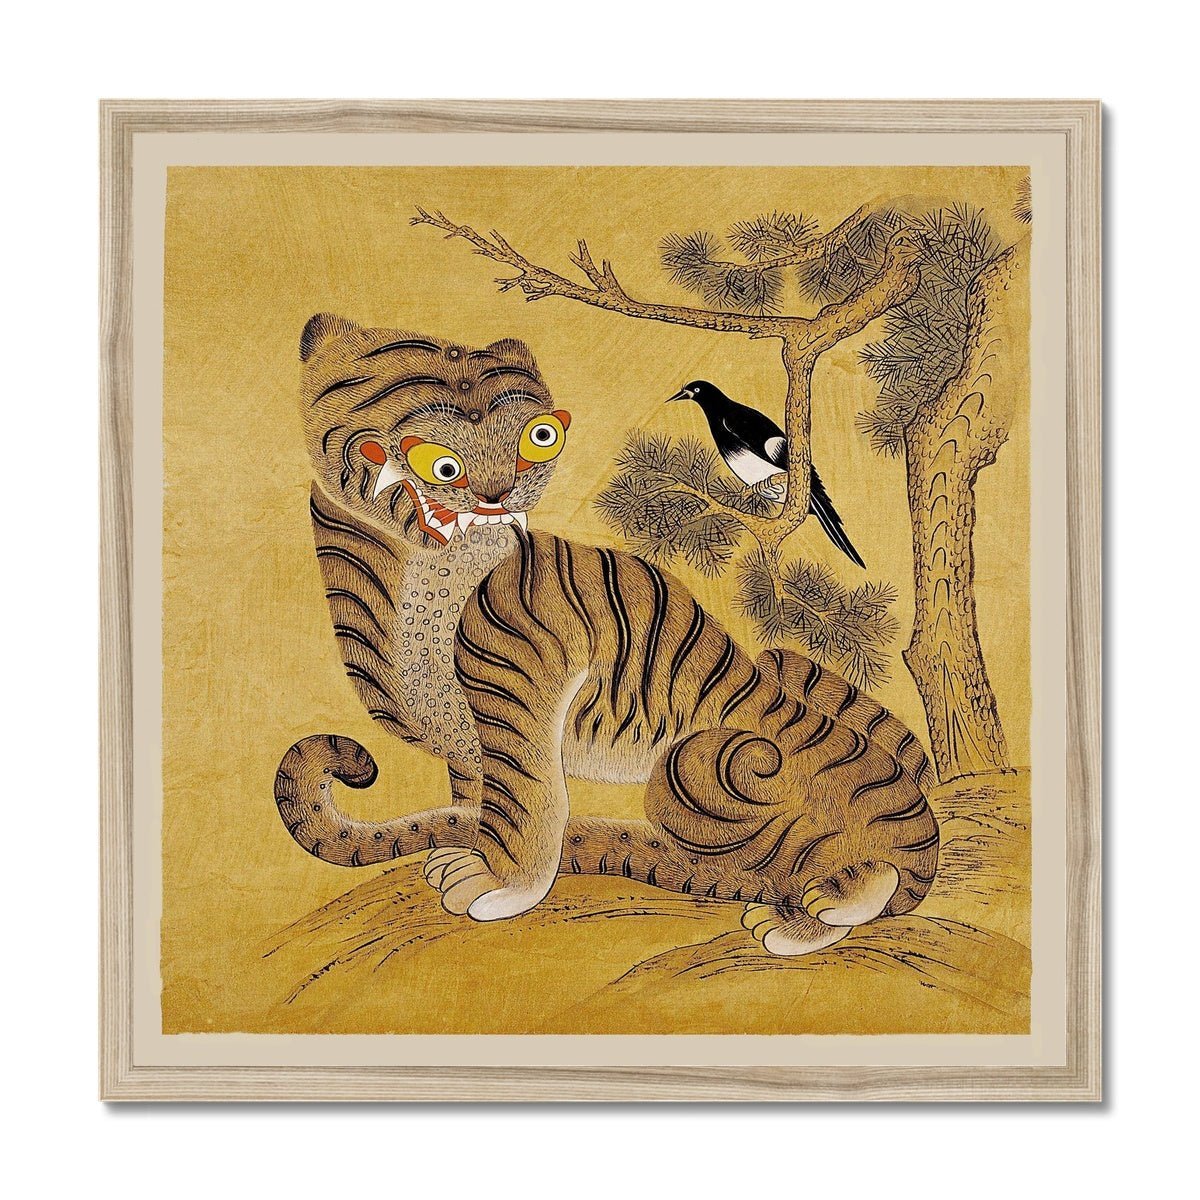 Framed Print 12"x12" / Natural Frame Freaky Tiger and Magpie: Korean 19th-Century Minhwa Folk Painting | Vintage Bird Cute Funny Kawaii Gift | Lion Leopard Poster Framed Print